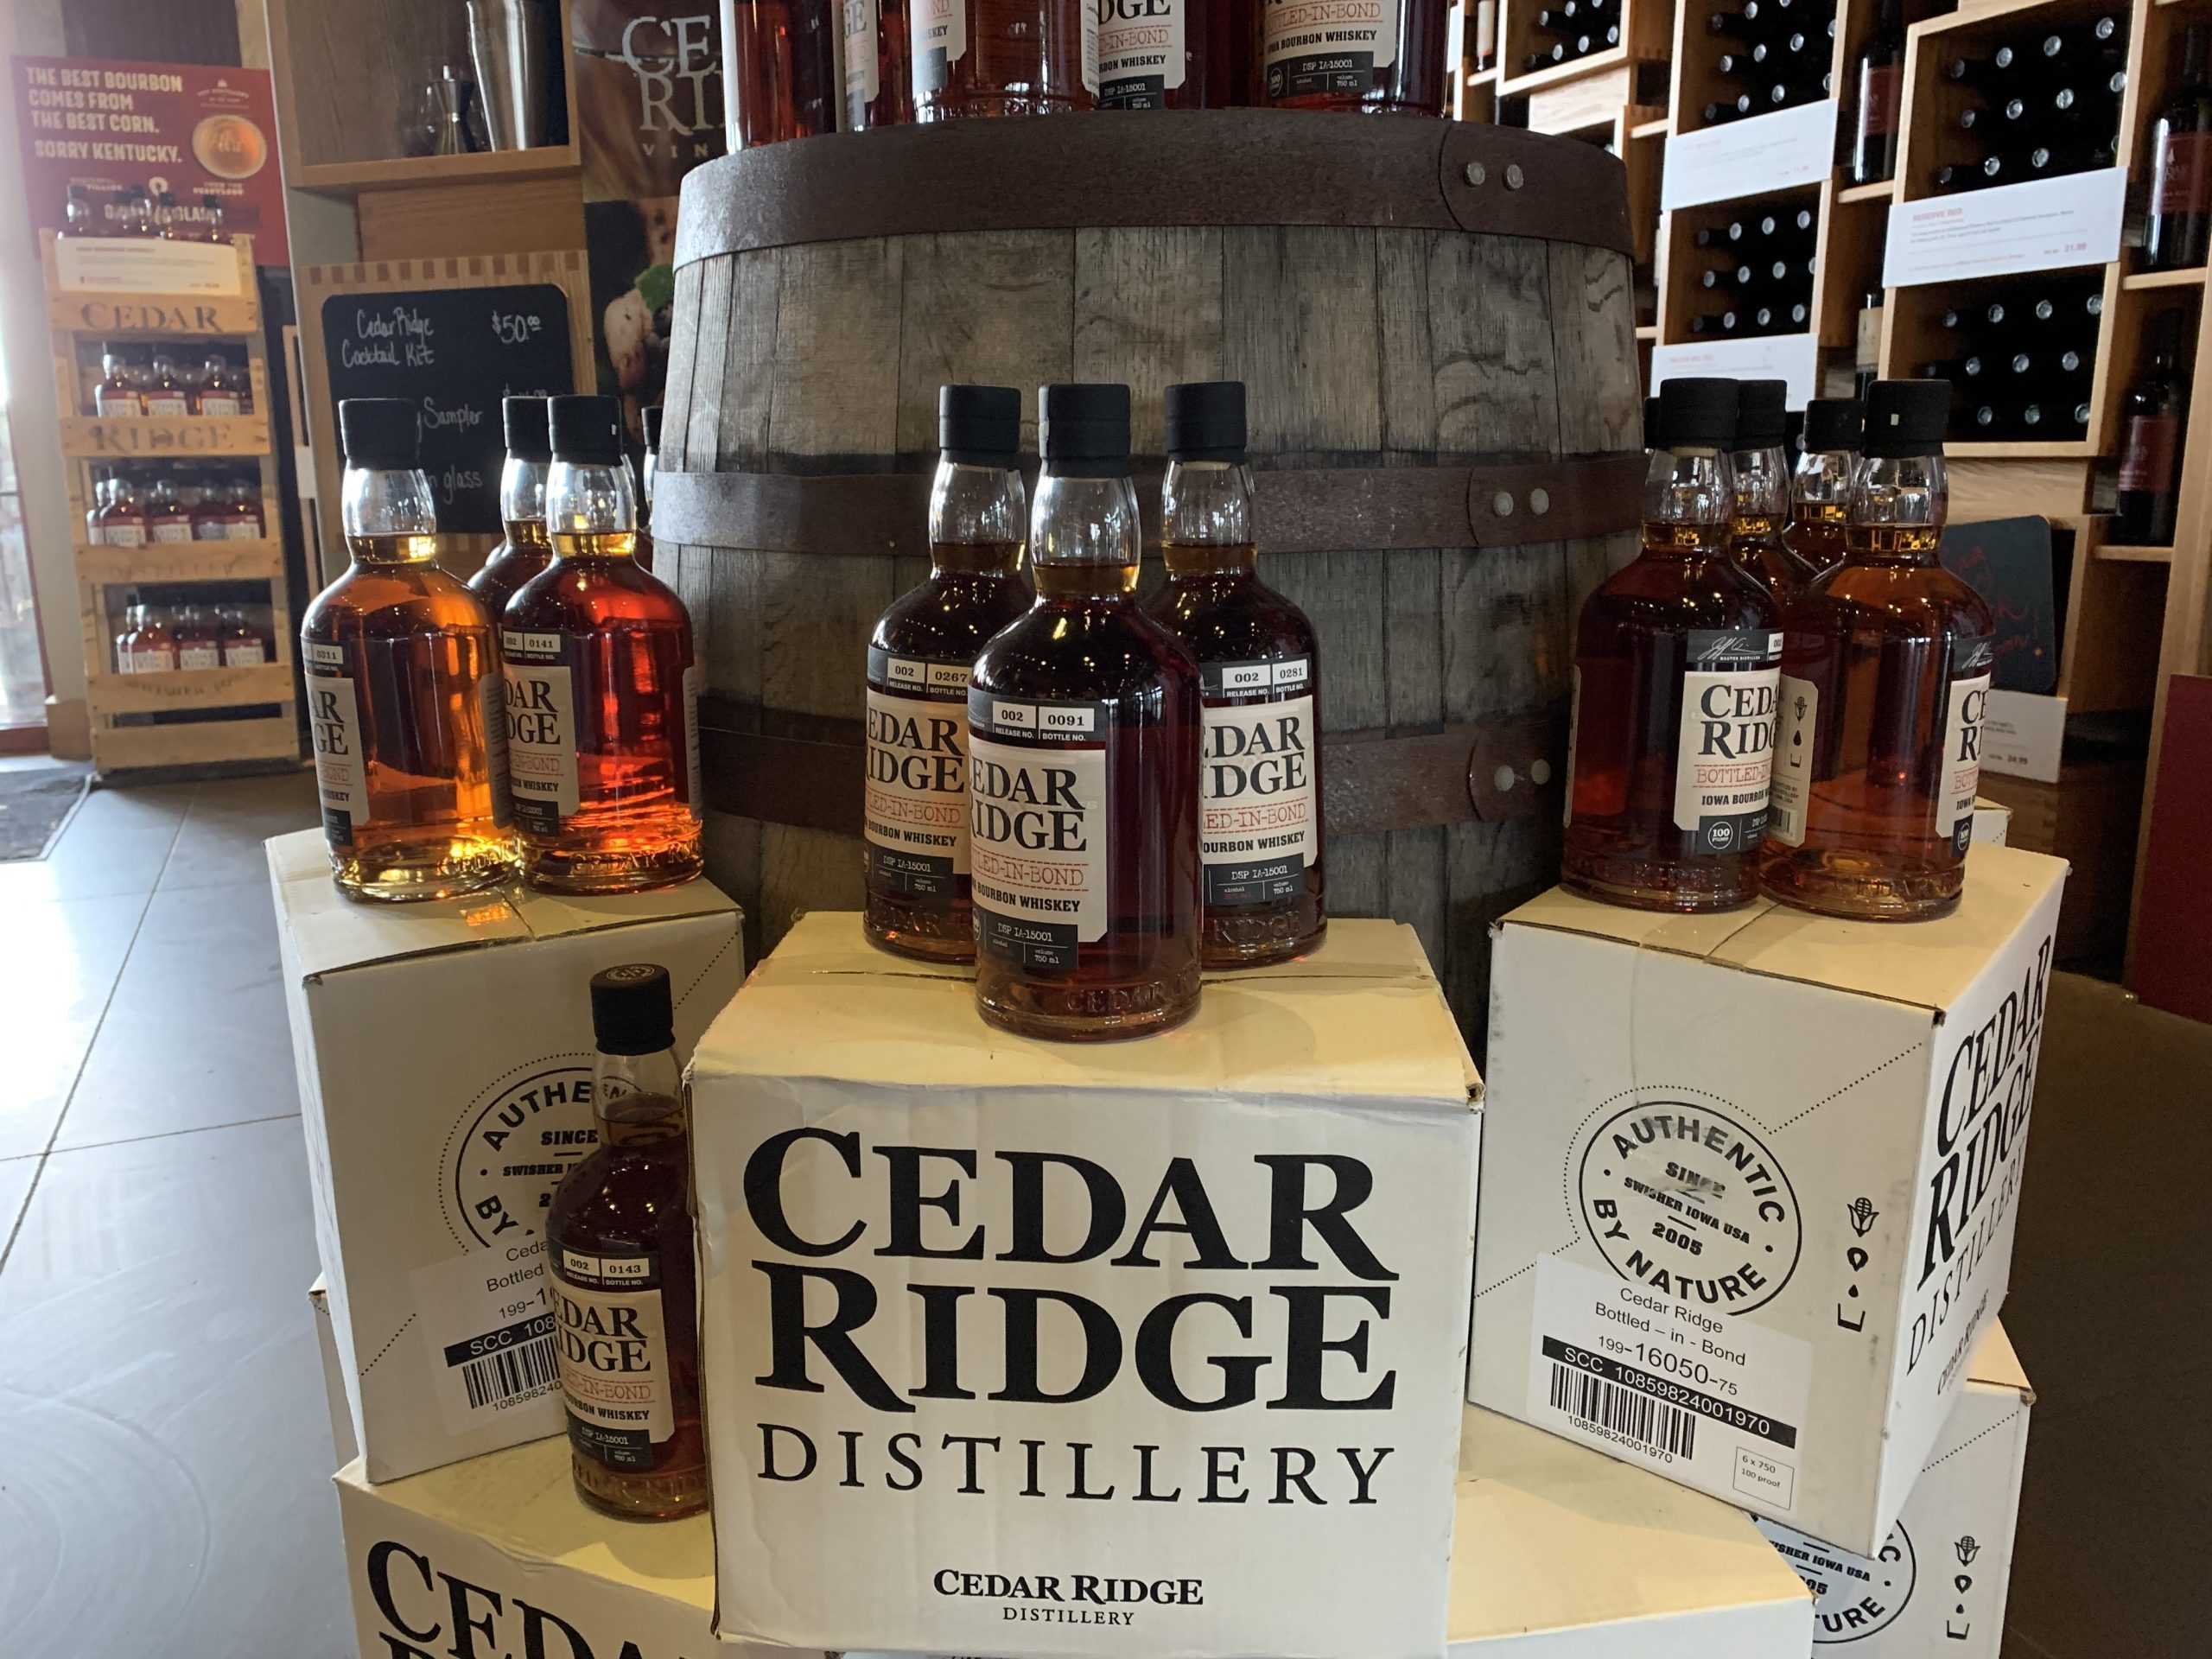 Cedar Ridge Distillery whiskey bottles sitting on top of branded boxes in front of an old whiskey barrel.